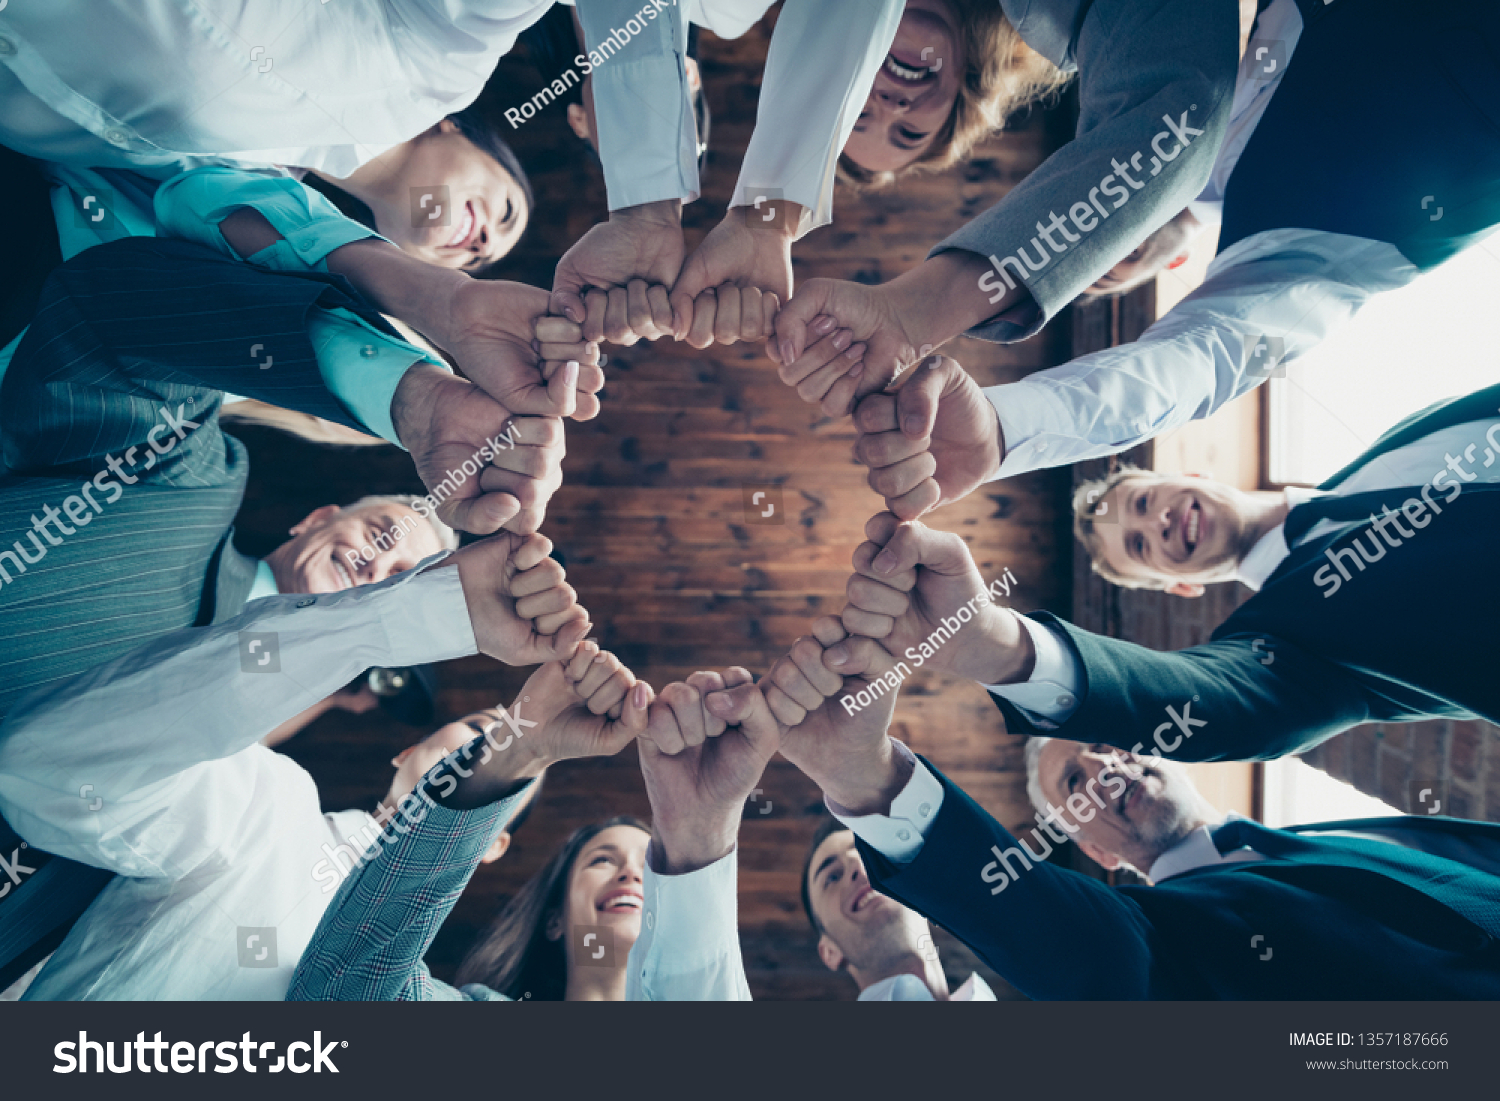 Close up low angle view photo members business people circle she her he him his hold hands arms fists together celebrate project prize nomination power inspiration dressed formal wear jackets shirts #1357187666